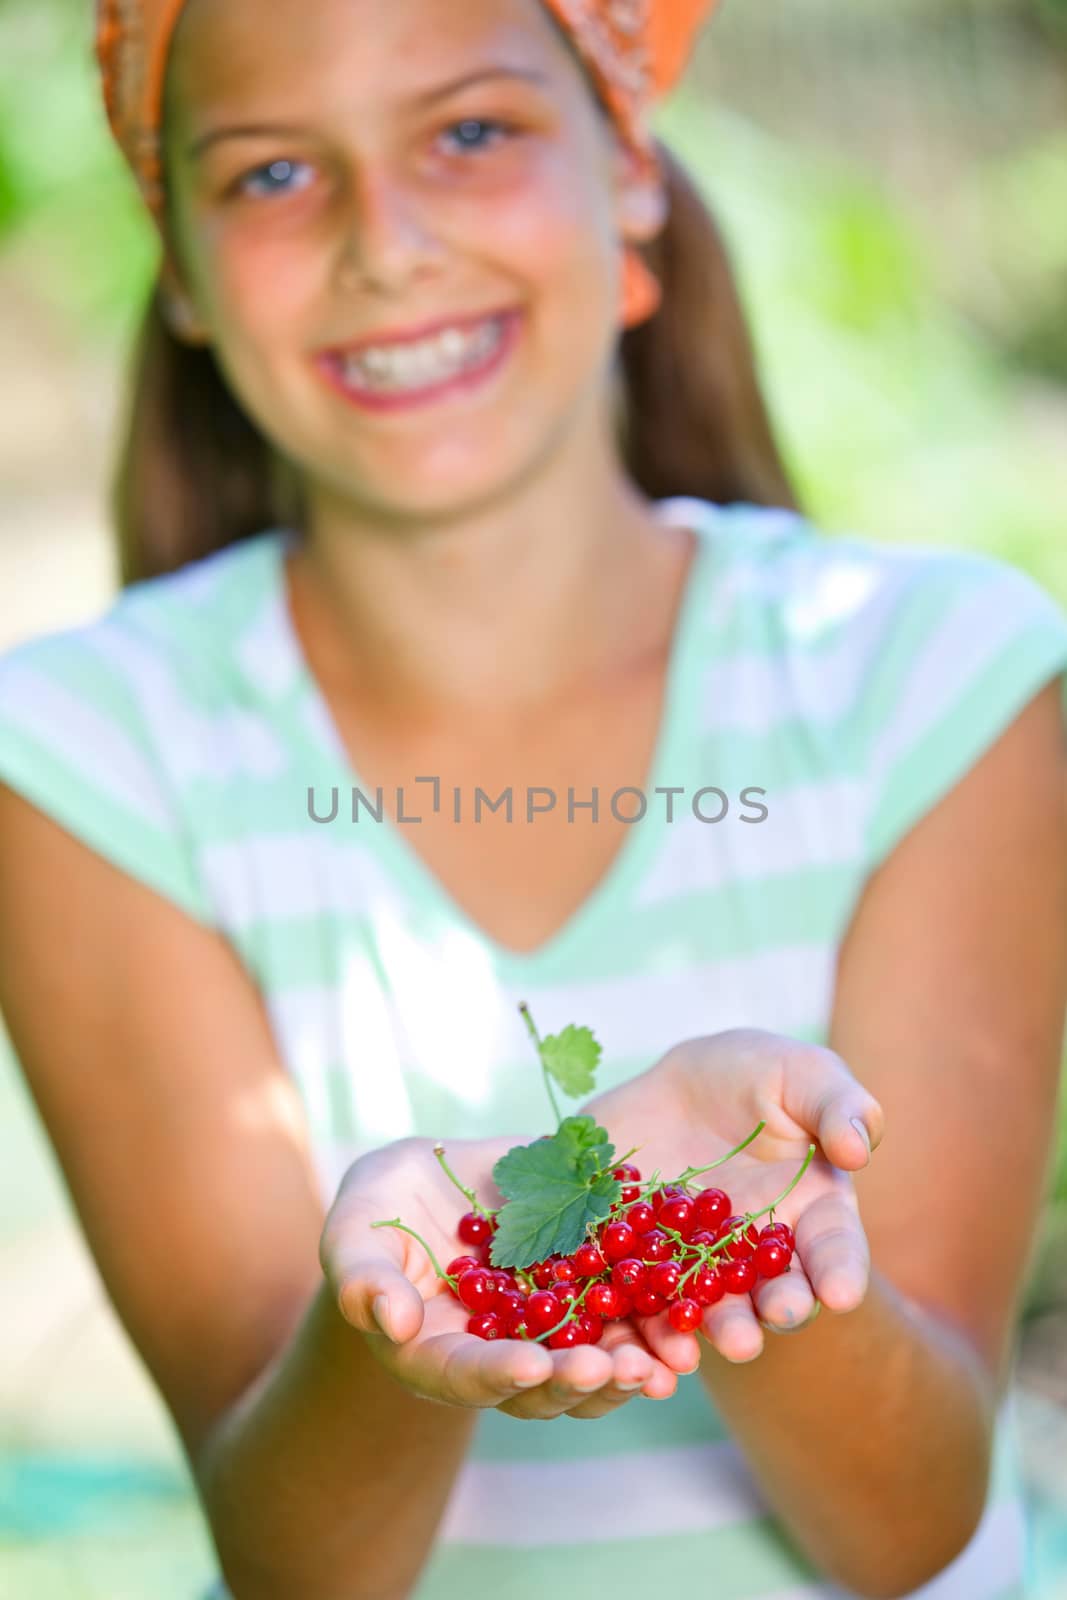 Girl with redcurrant. by maxoliki